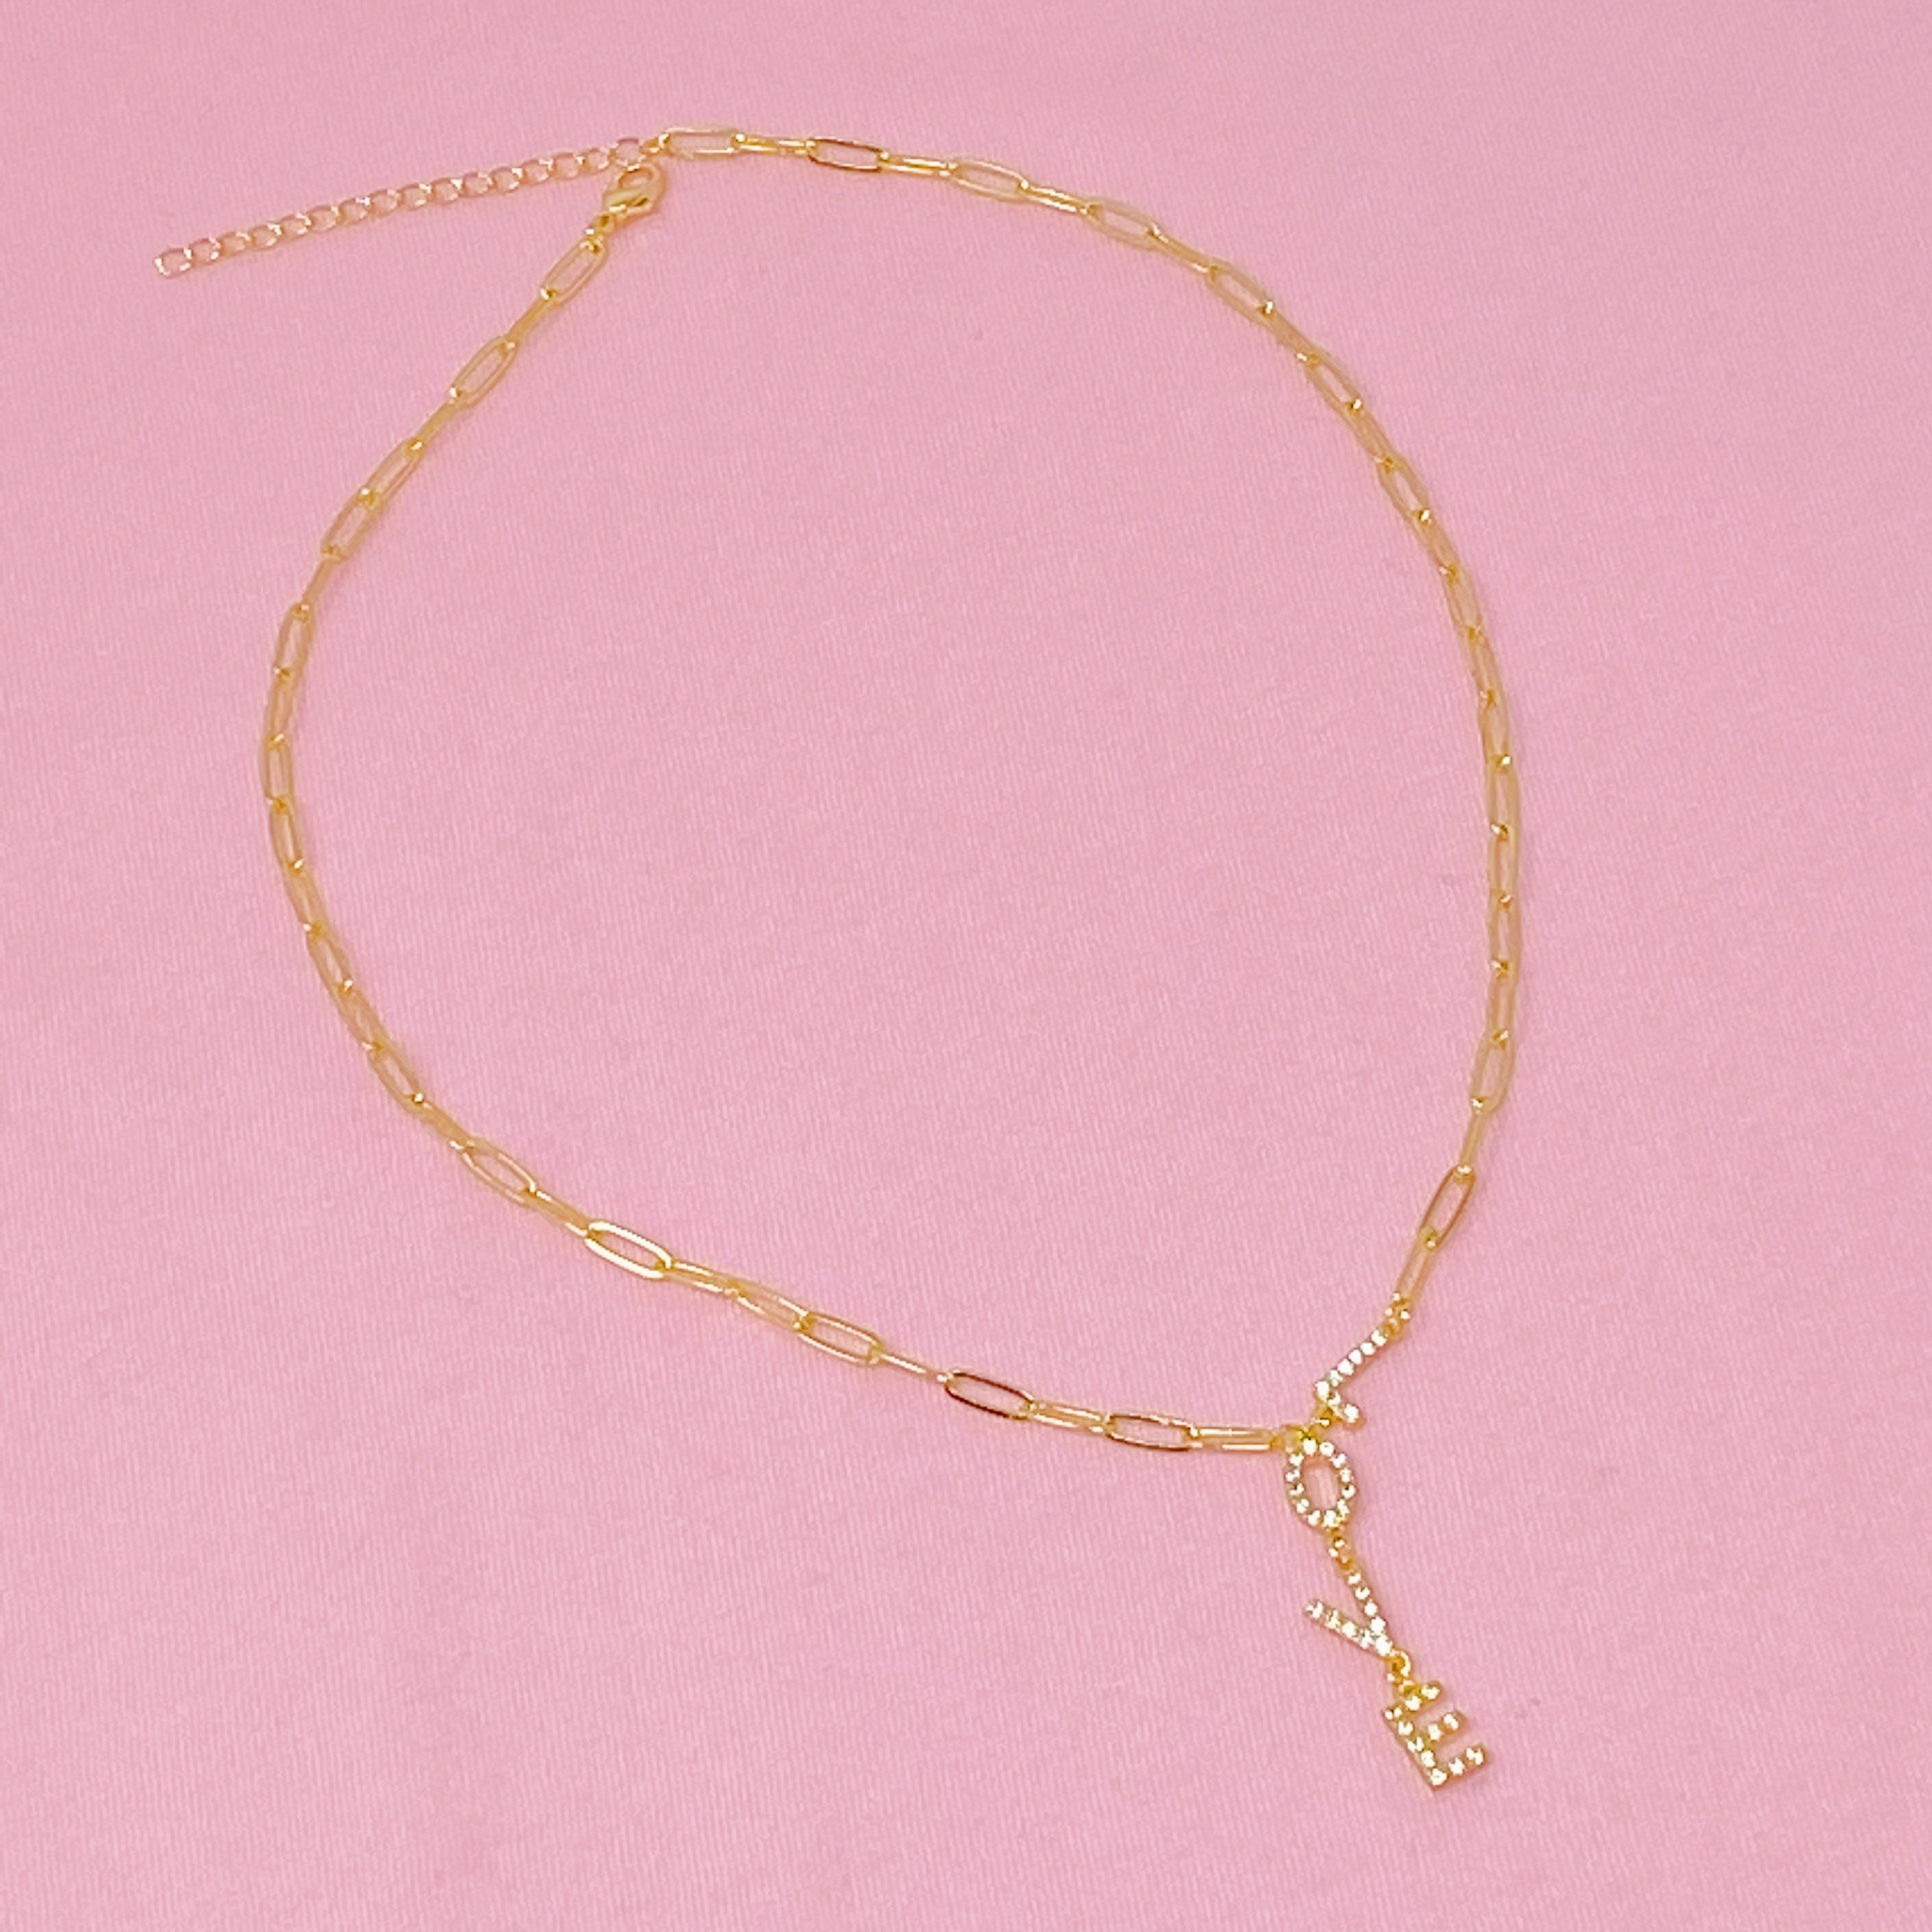 Gold Plated "LOVE" Dangle Necklace